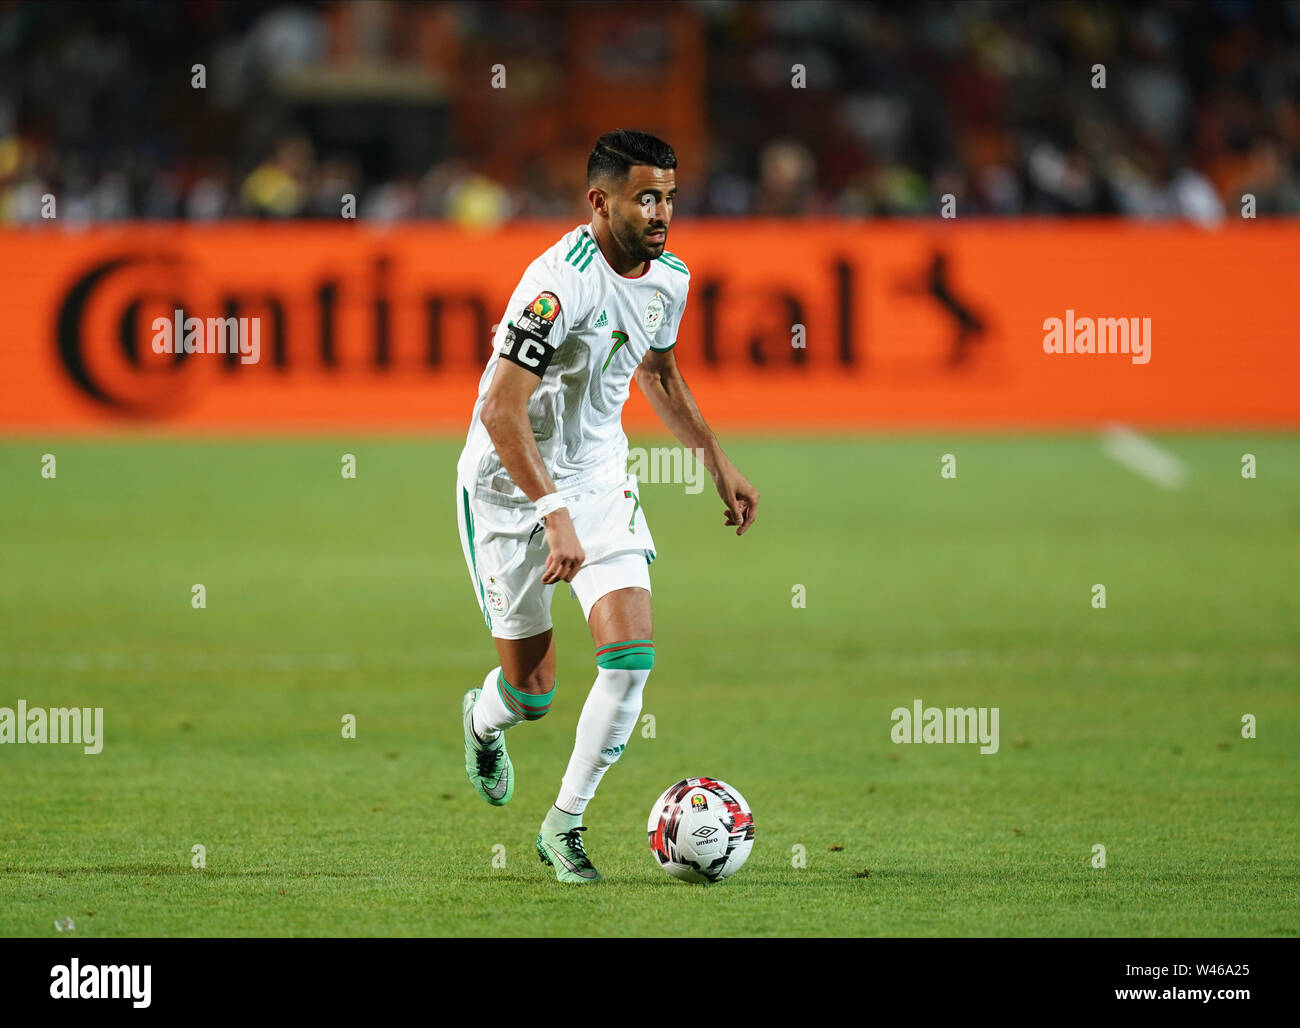 Cairo, Algeria, Egypt. 19th July, 2019. FRANCE OUT July 19, 2019: Riyad Karim Mahrez of Algeria during the Final of 2019 African Cup of Nations match between Algeria and Senegal at the Cairo International Stadium in Cairo, Egypt. Ulrik Pedersen/CSM/Alamy Live News Stock Photo